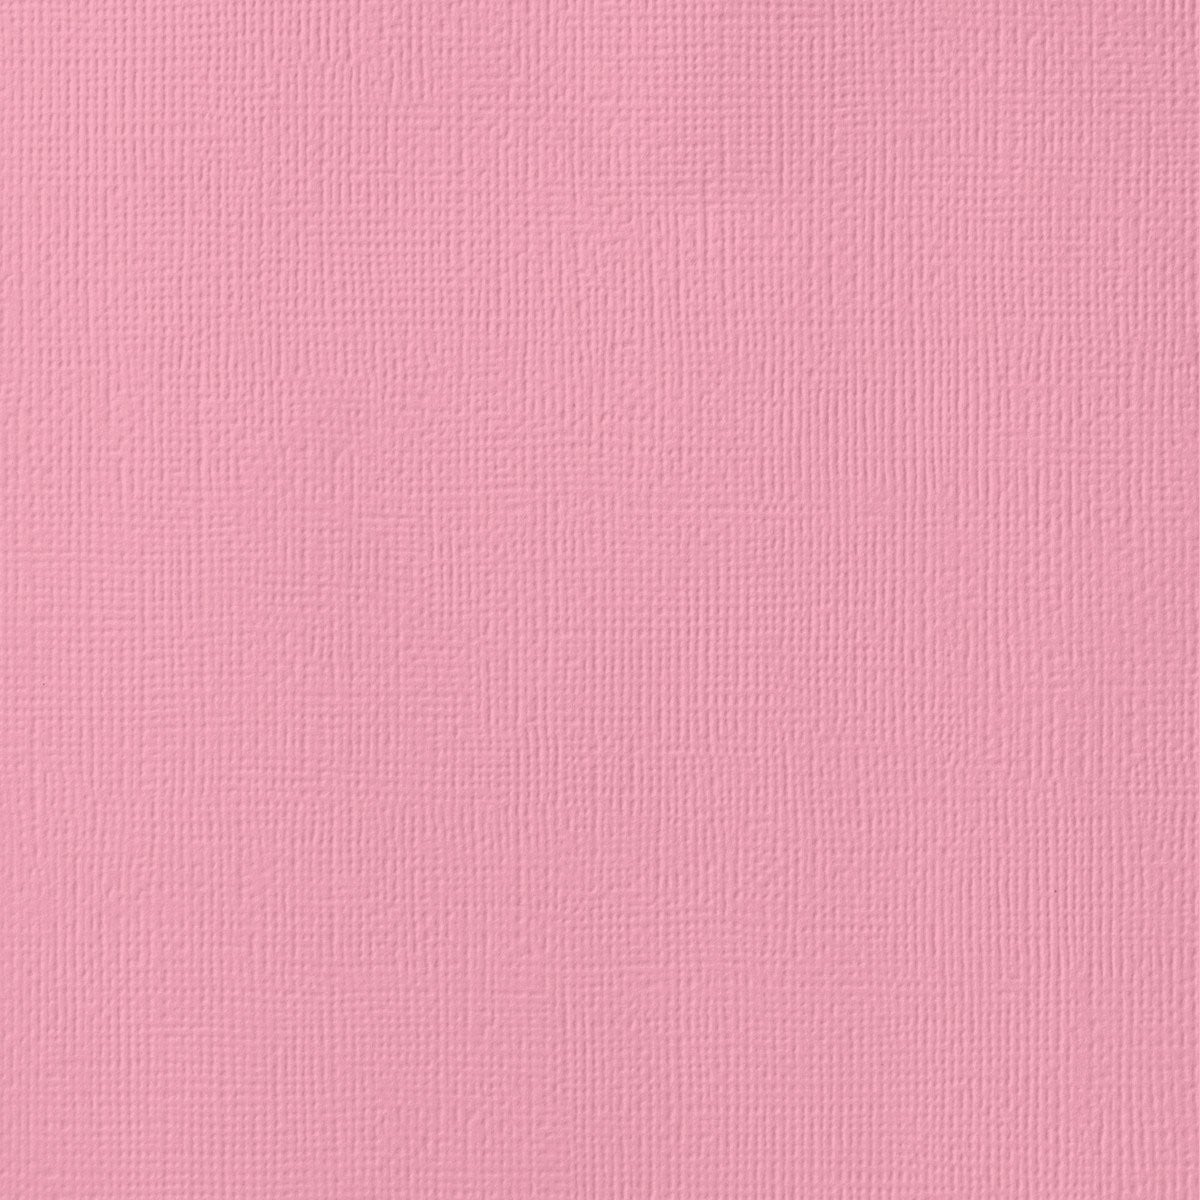 COTTON CANDY pink cardstock - 12x12 inch - 80 lb - textured scrapbook paper - American Crafts